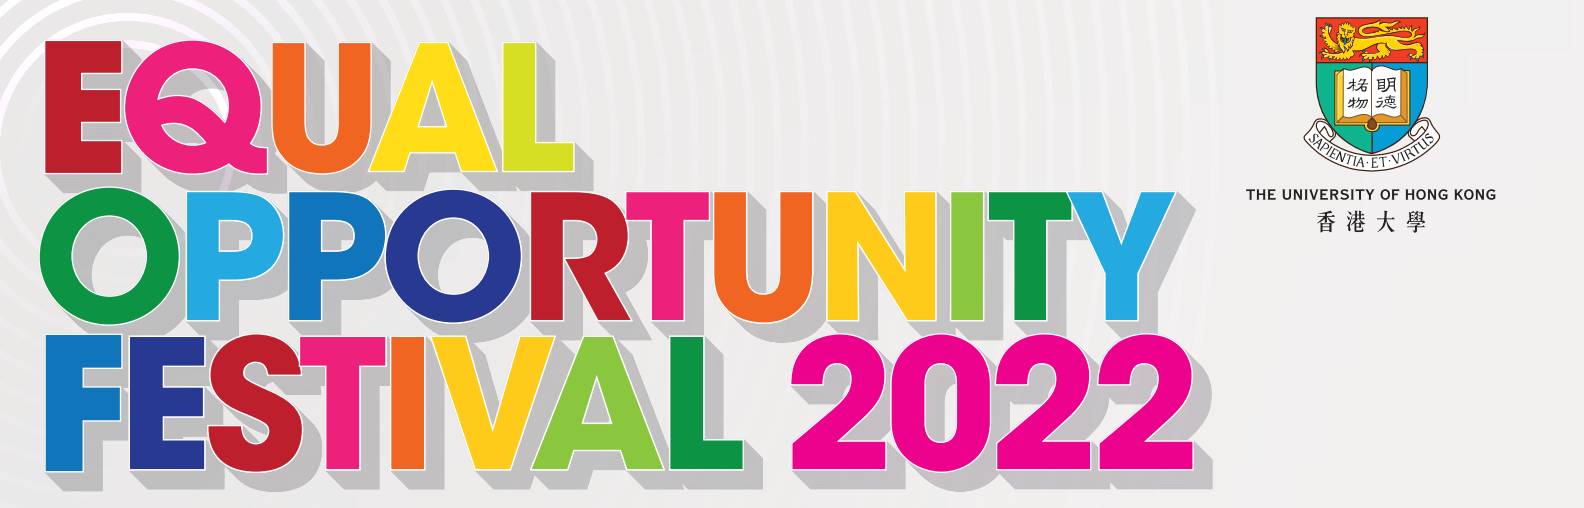 Equal Opportunity Festival 2022 Poster. Content same as text on this webpage.